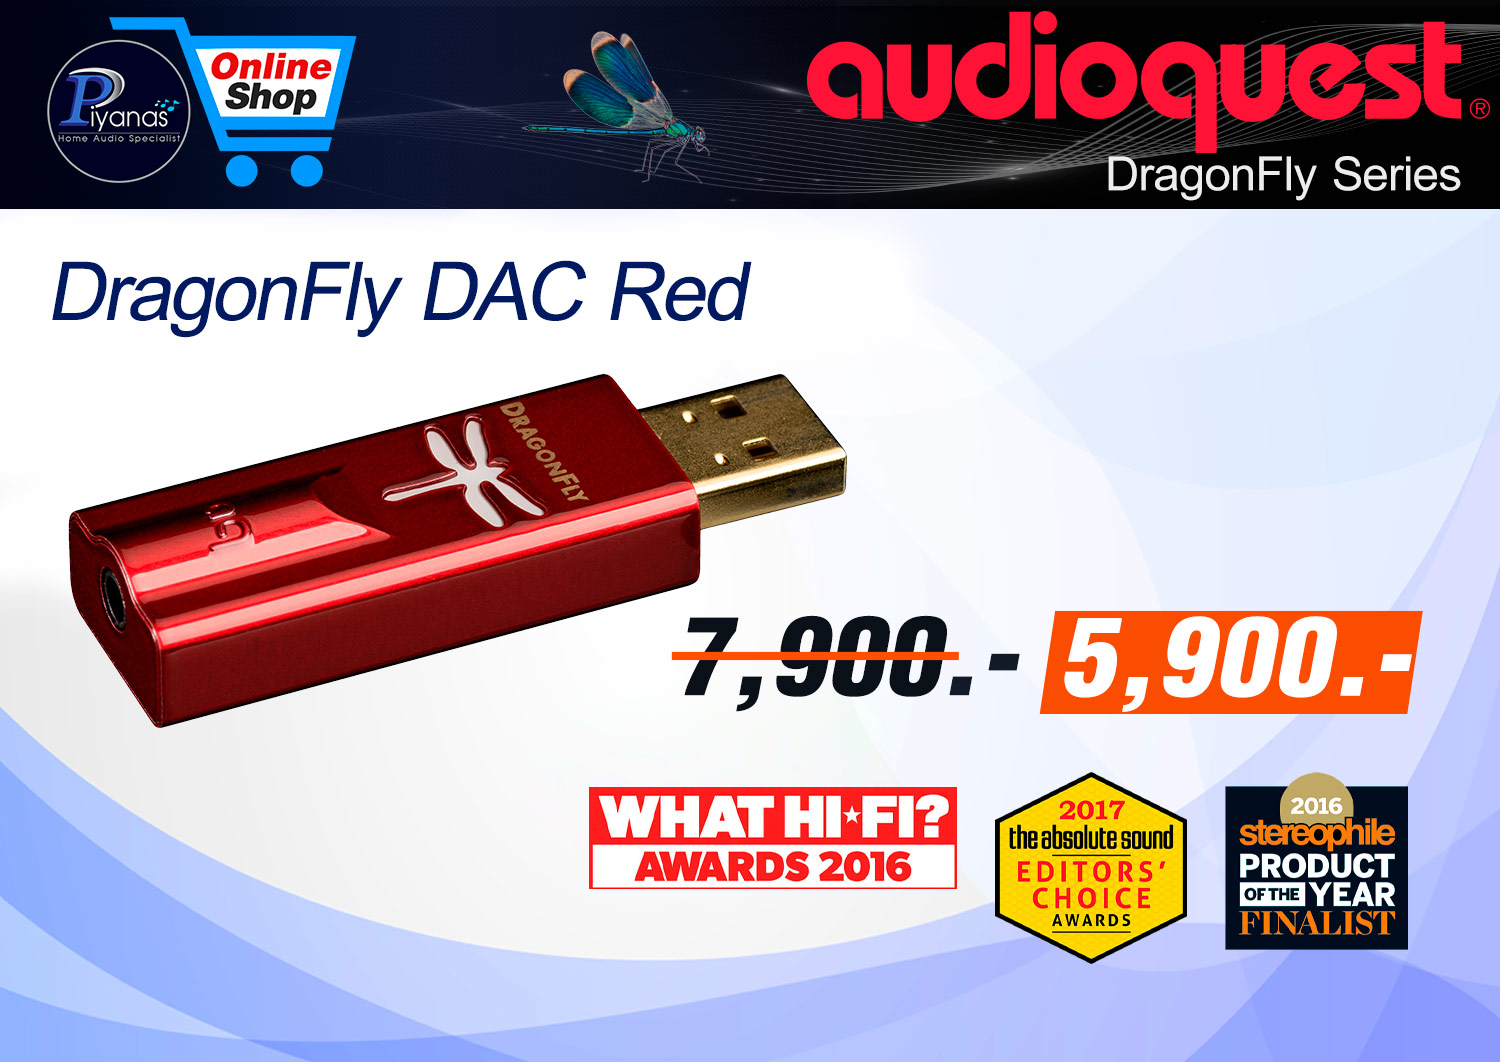 DragonFly DAC RED